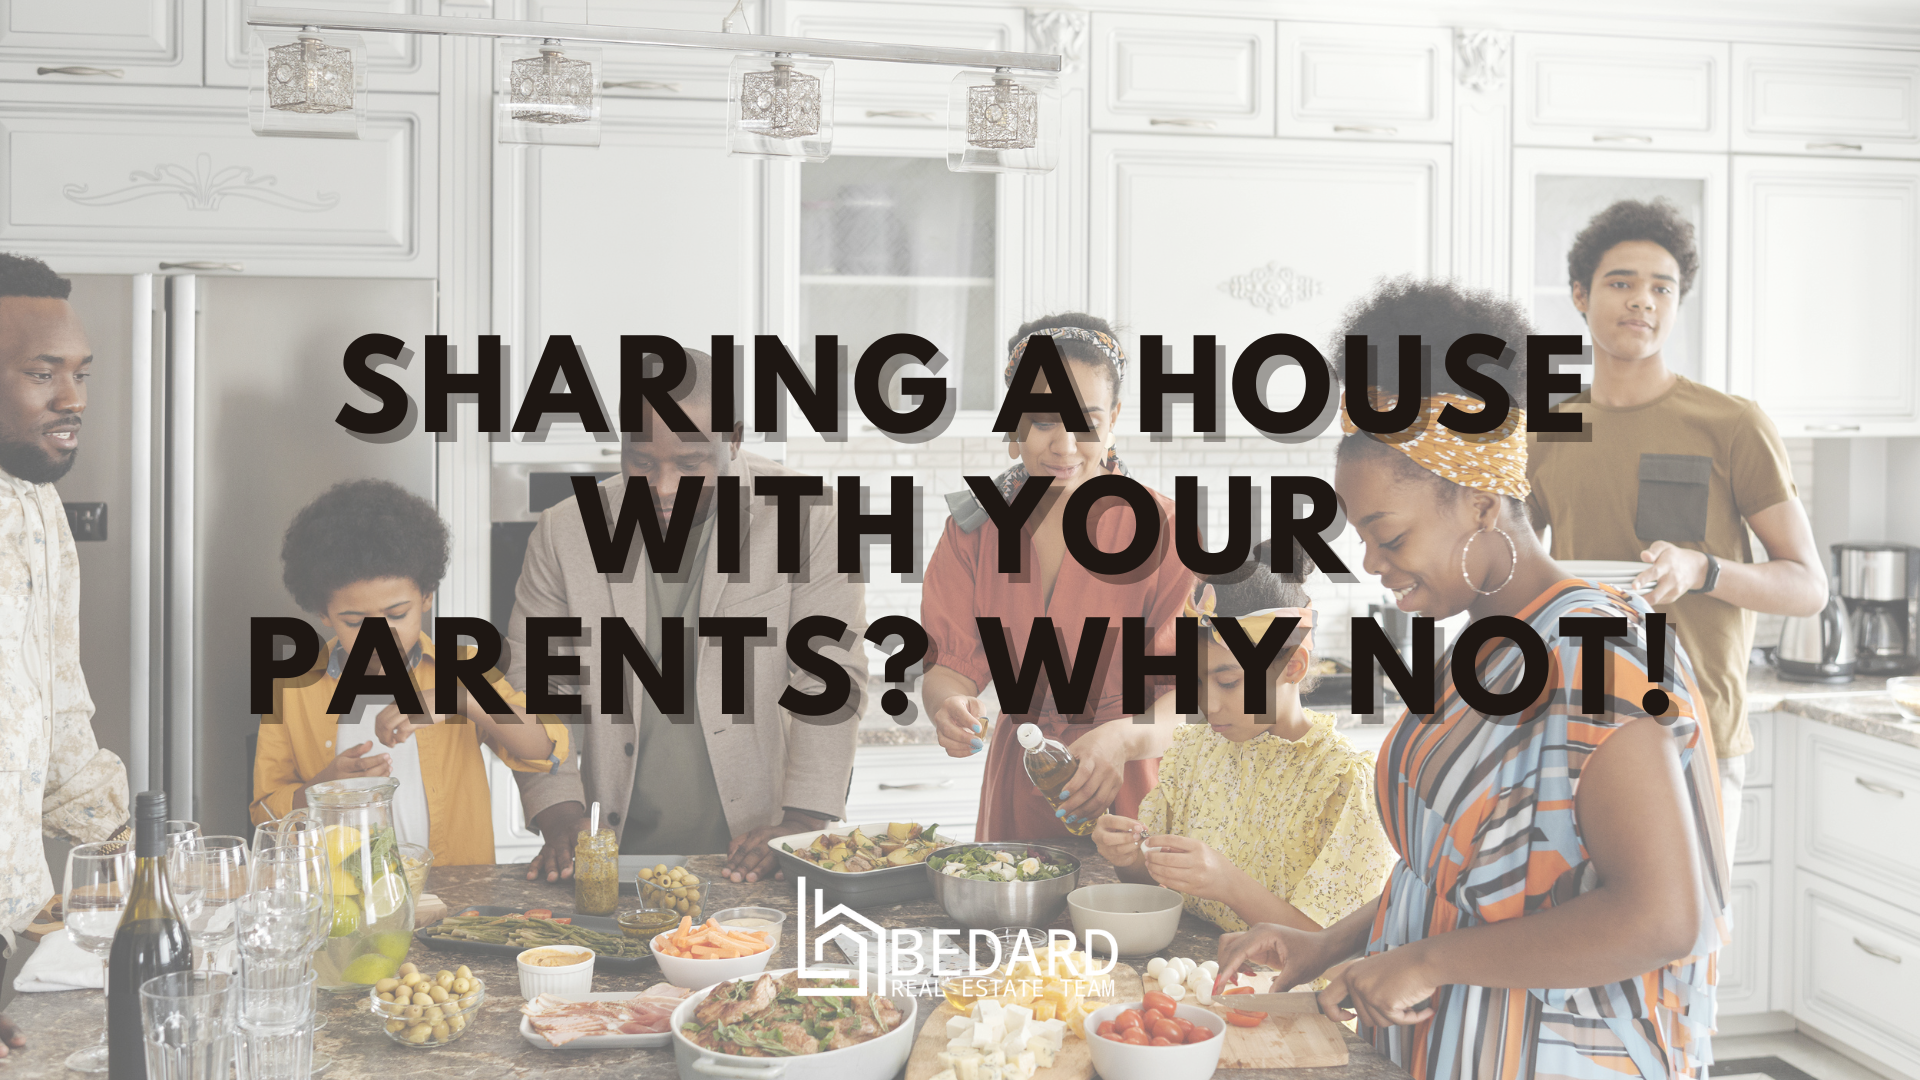 Sharing a house with your parents? Why not!